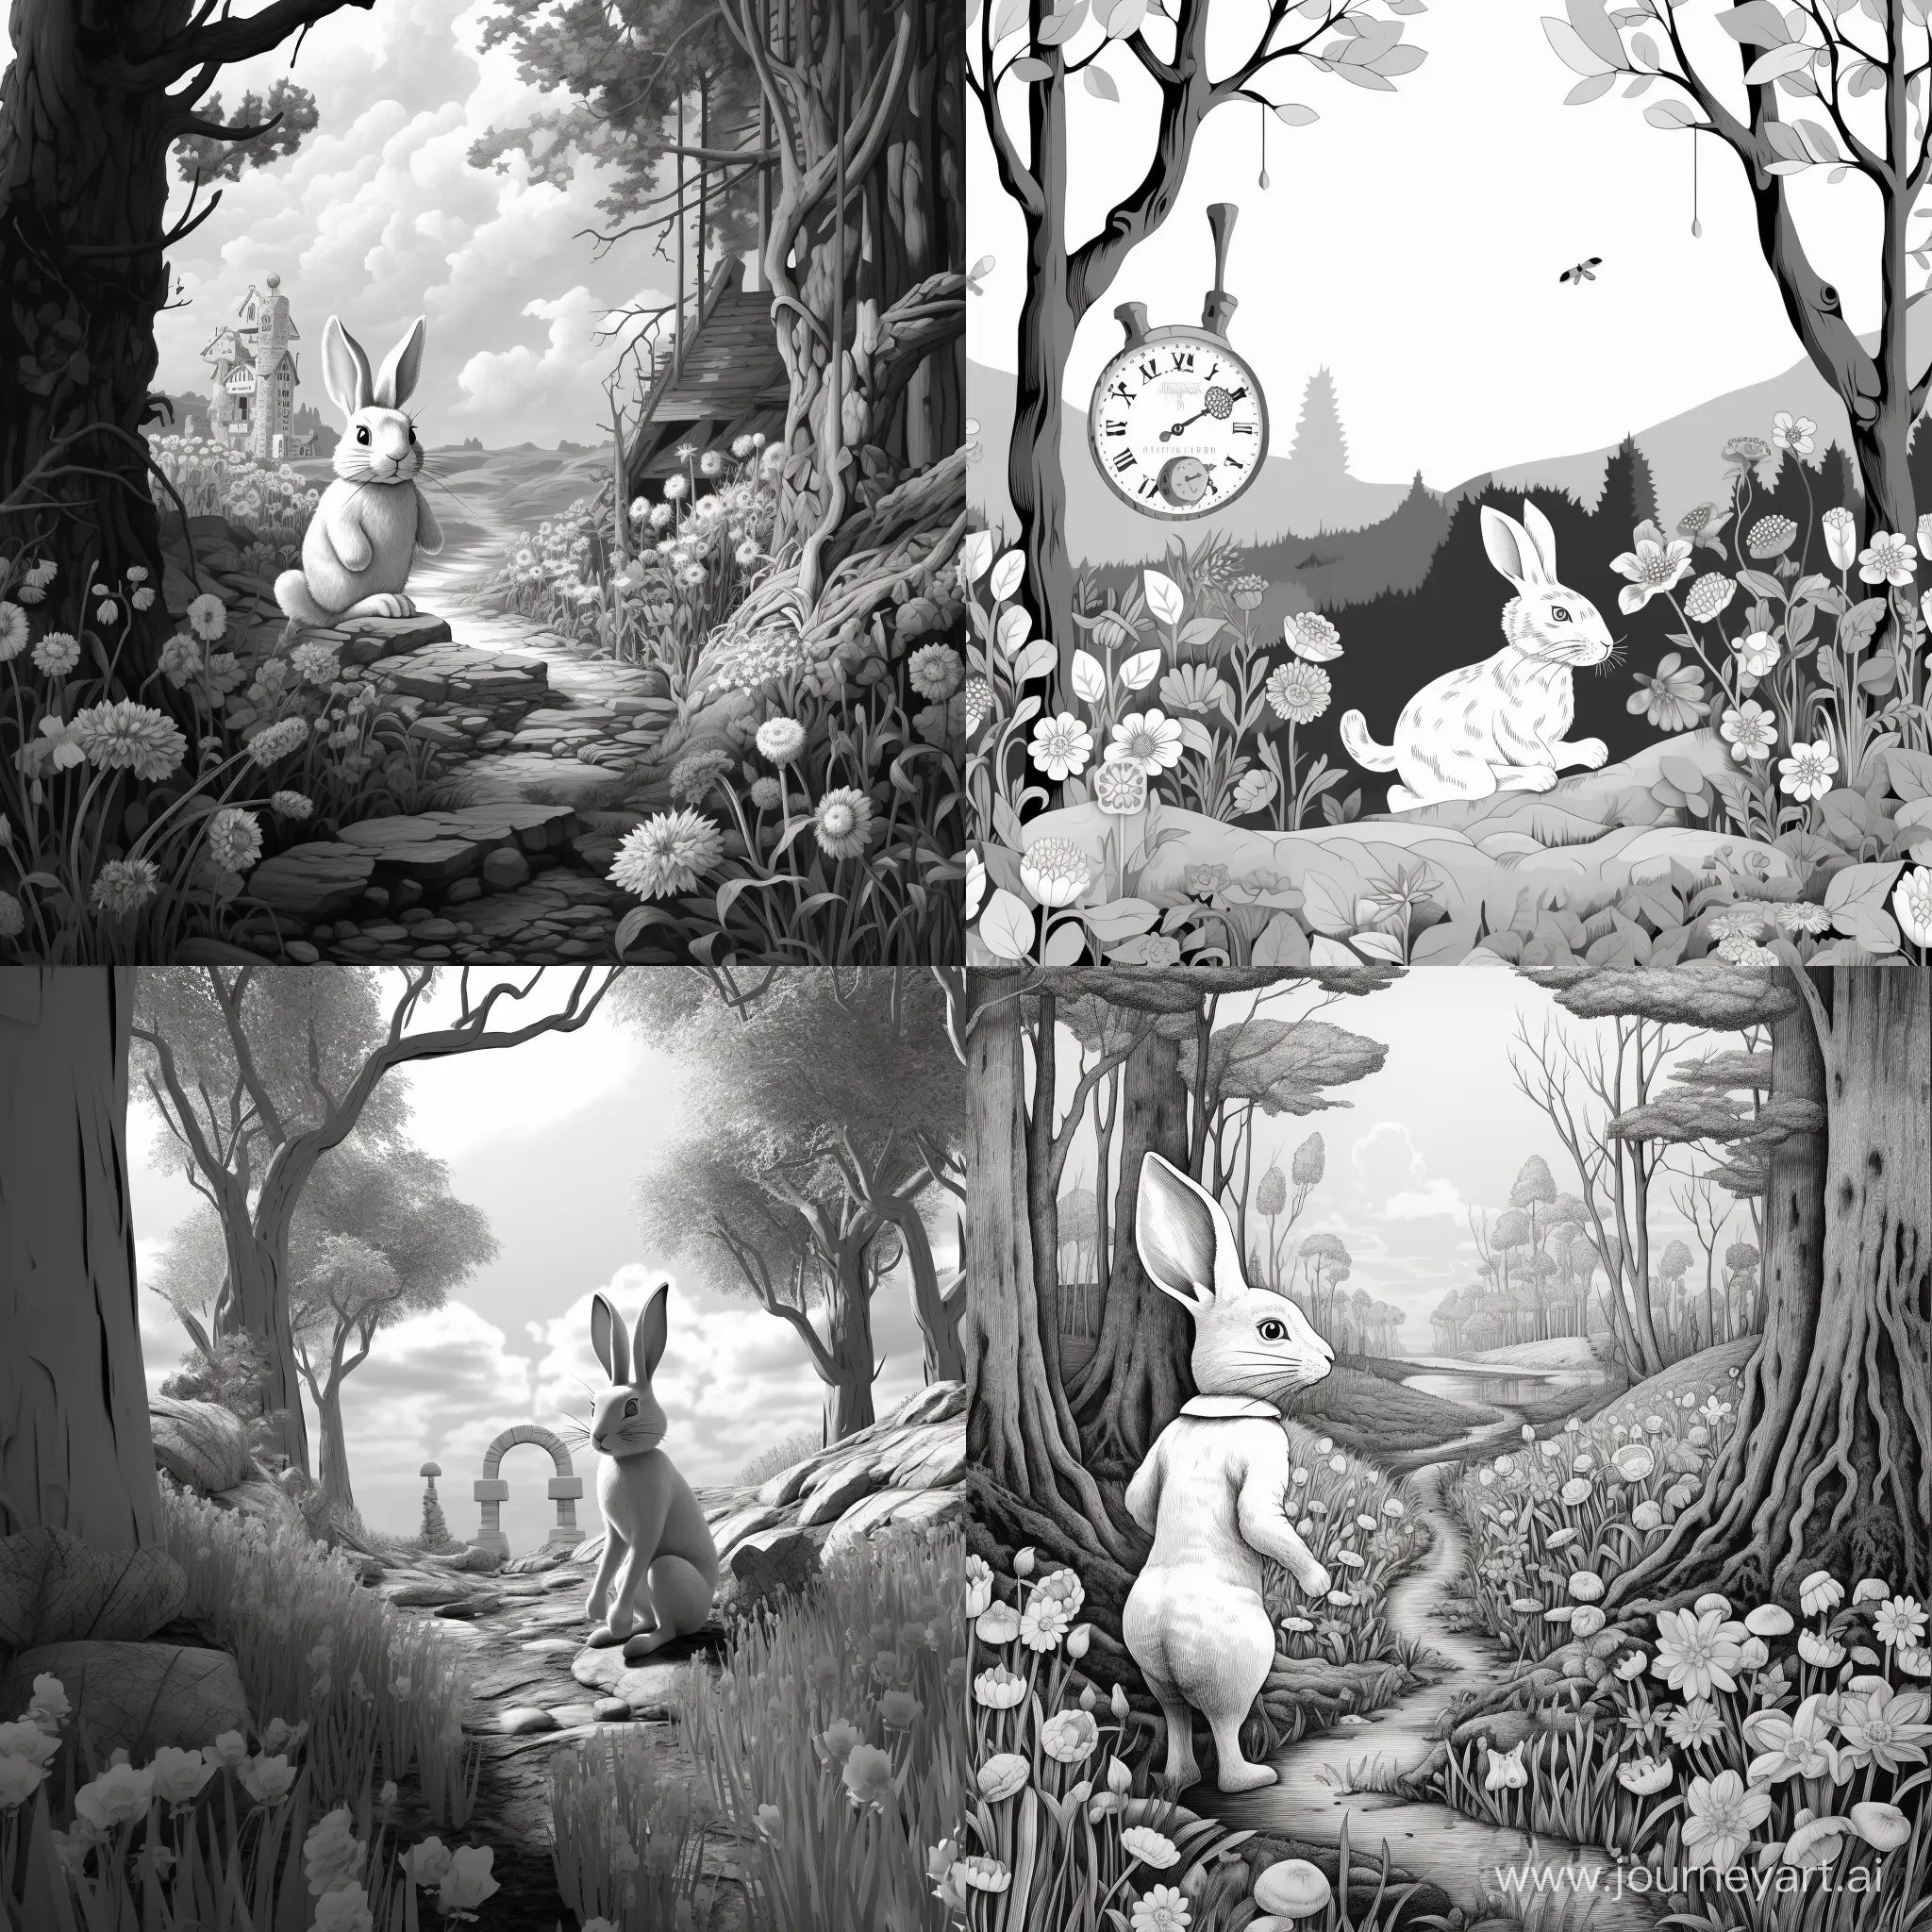 Input the white rabbit in view side fast run down in the forest with trees flowers and stones monochrome 